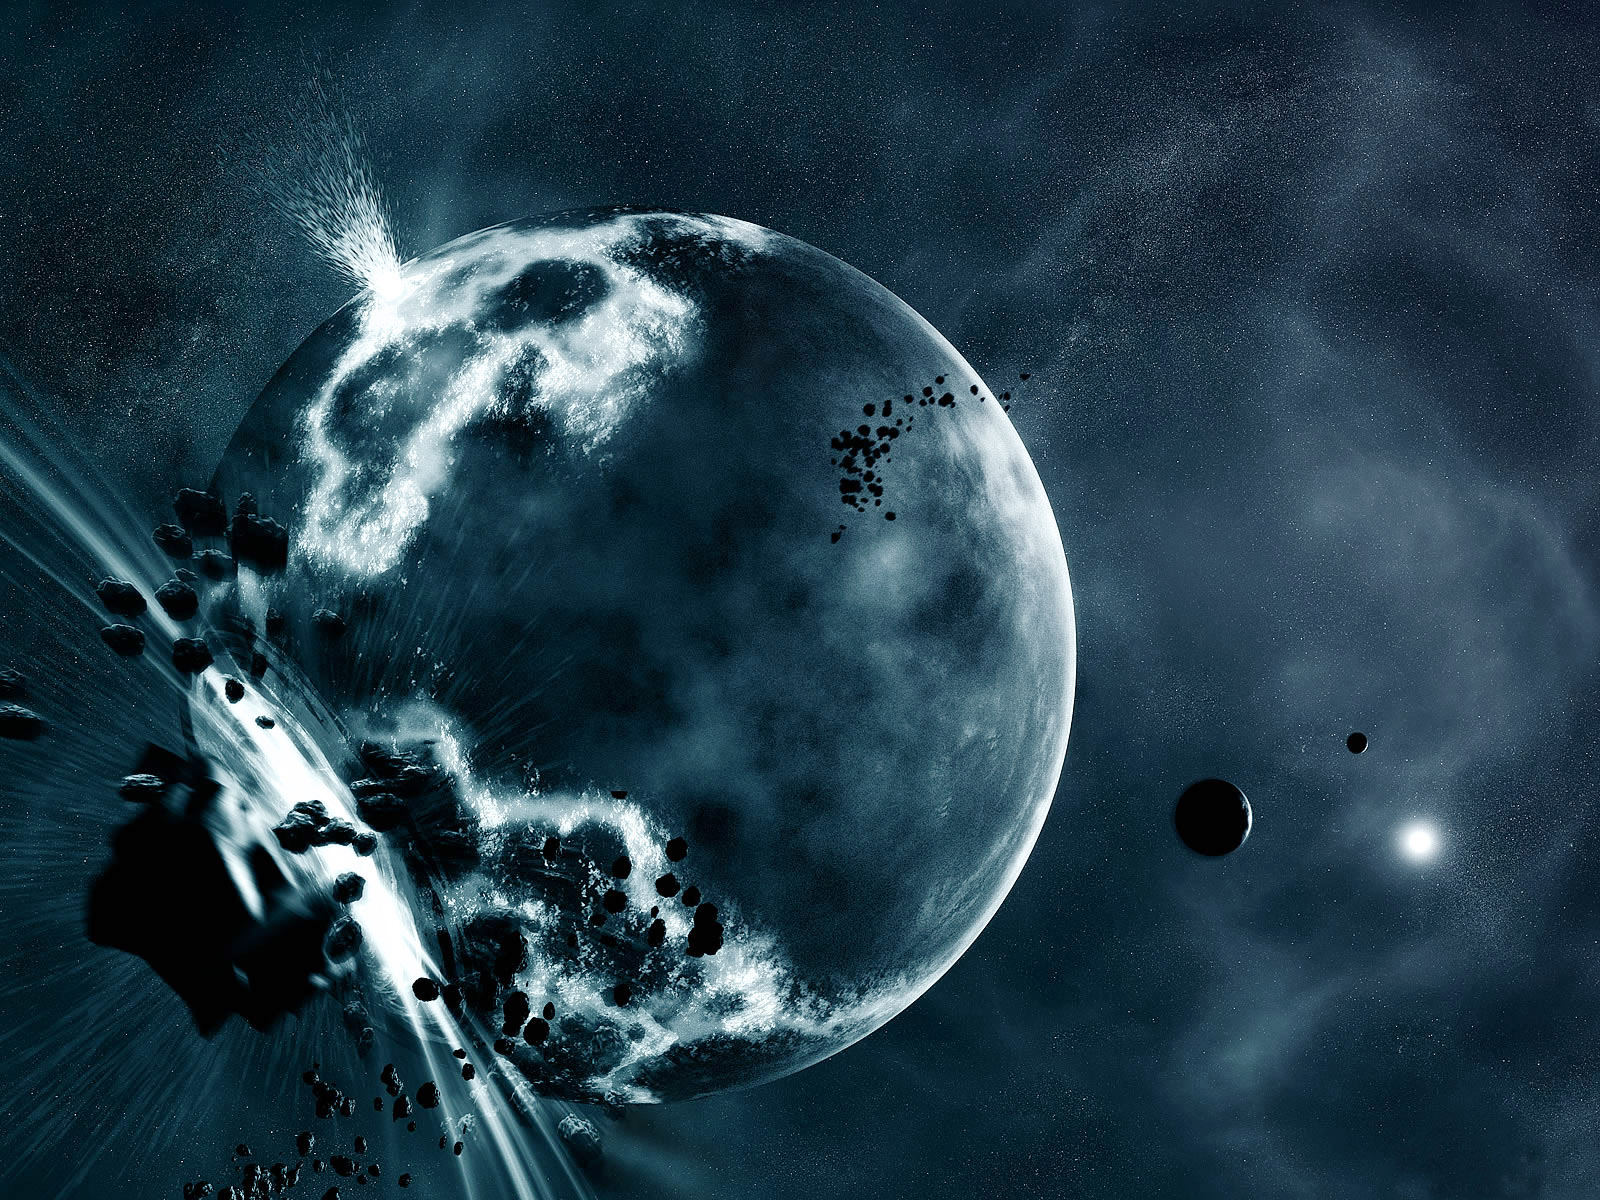 sci, Fi, Science, Space, Stars, Planets, Asteroids, Comet, Collision, Apocalyptic, Explosion, Cg, Digital, Art Wallpaper